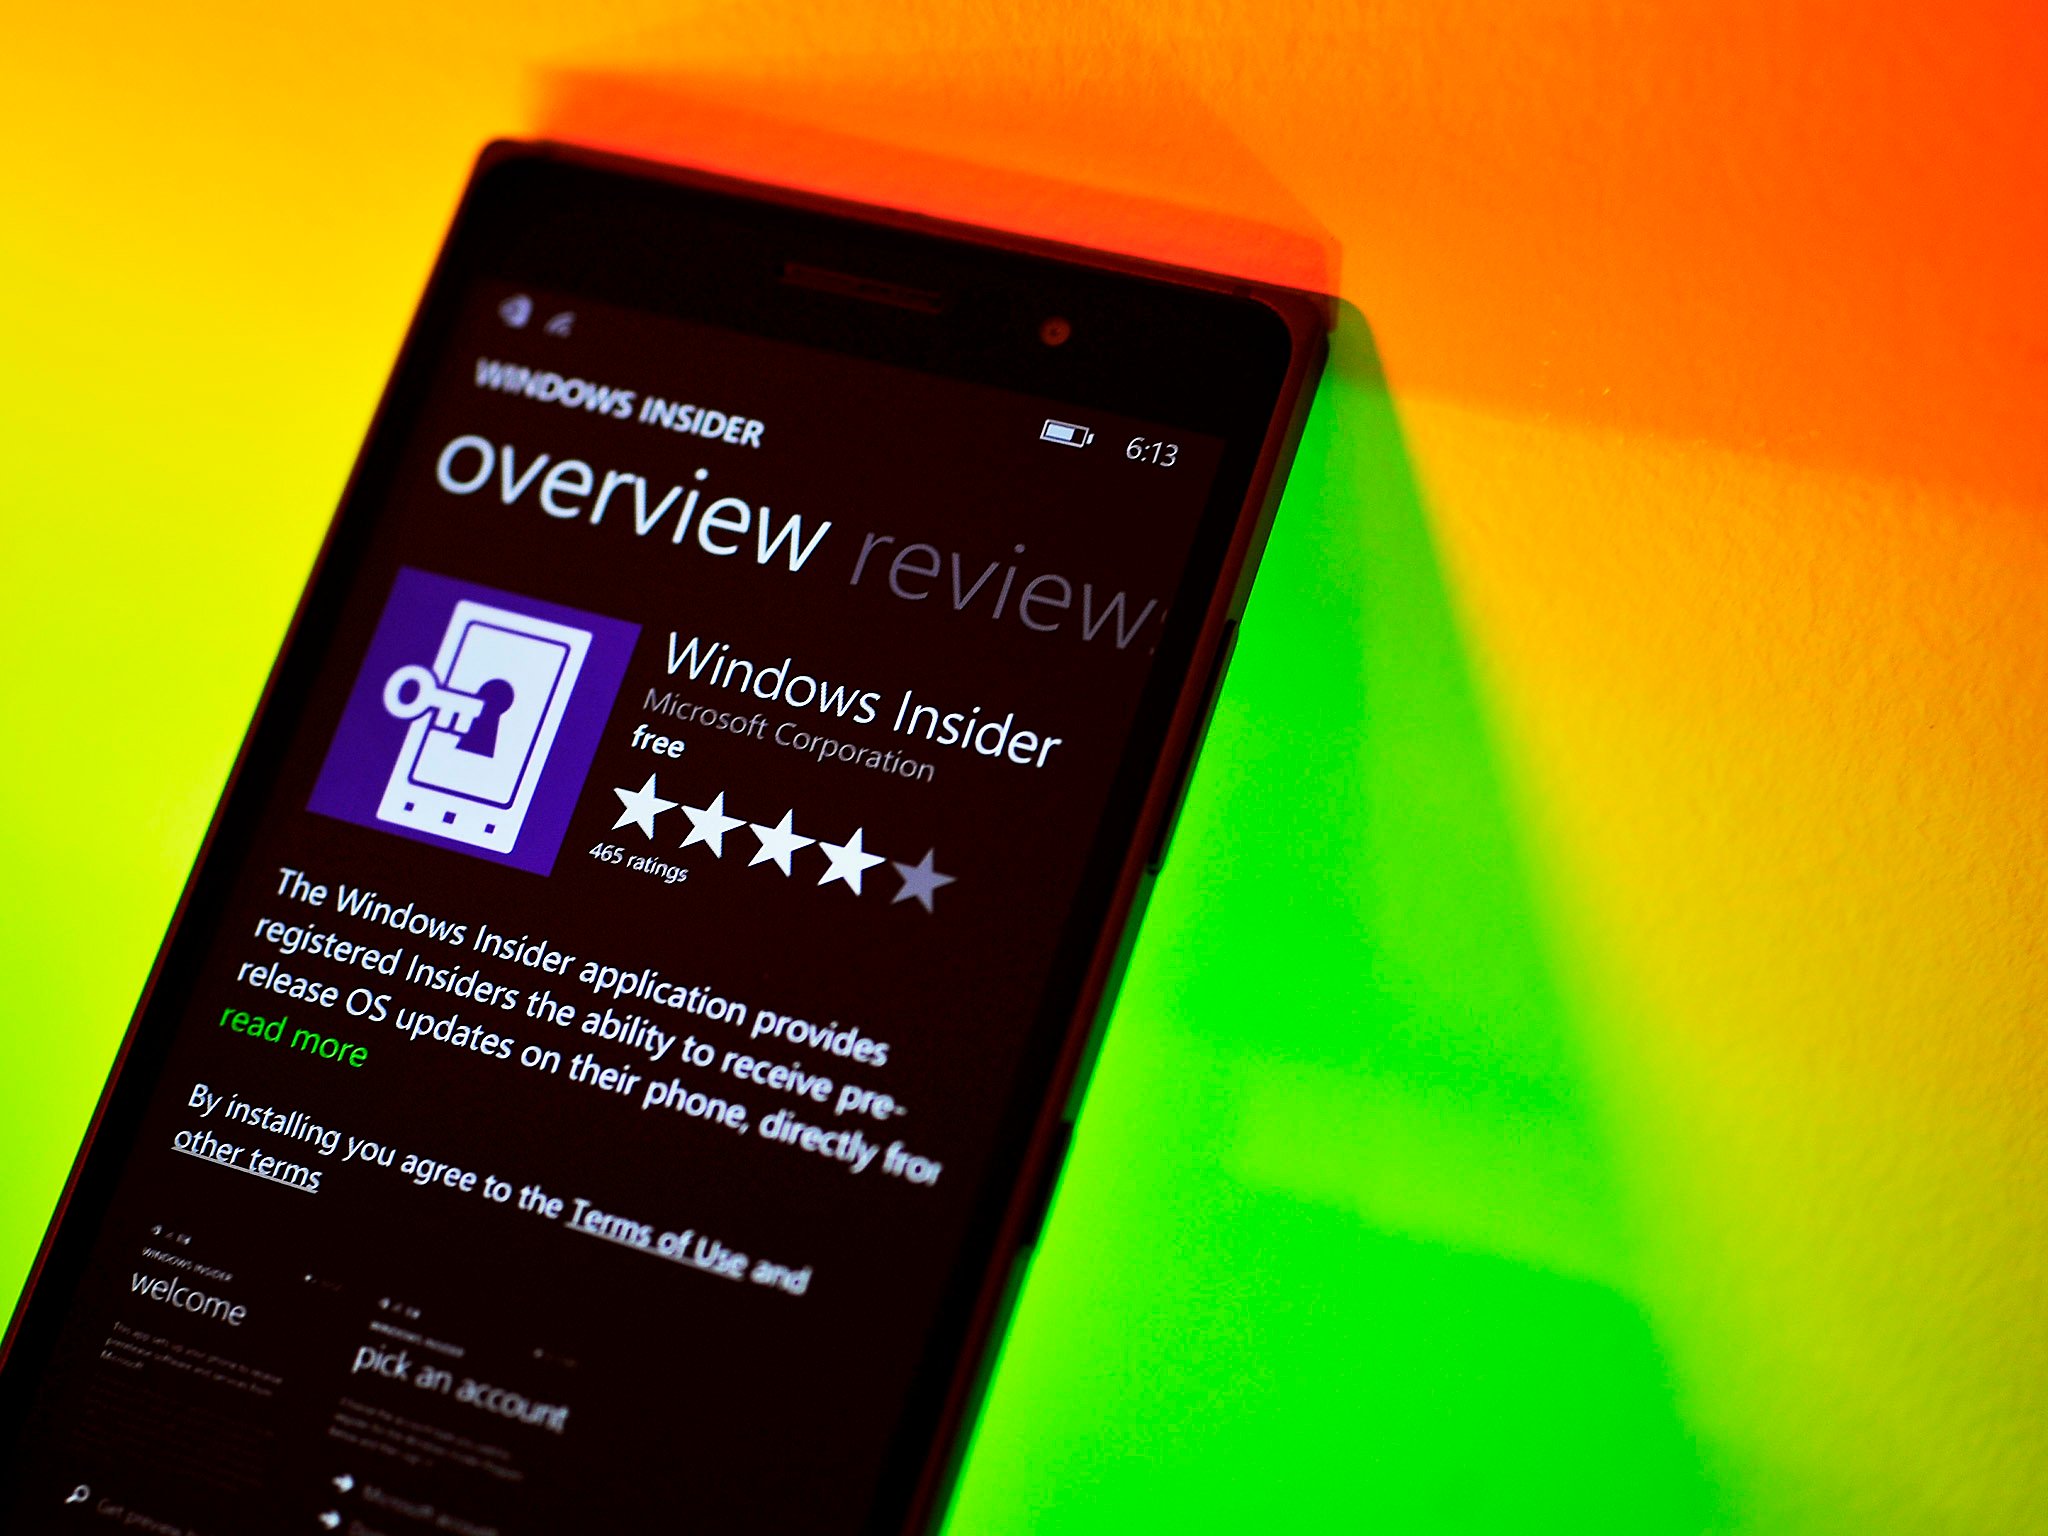 Windows Insider app scores an update, may have blocked Preview hack ...